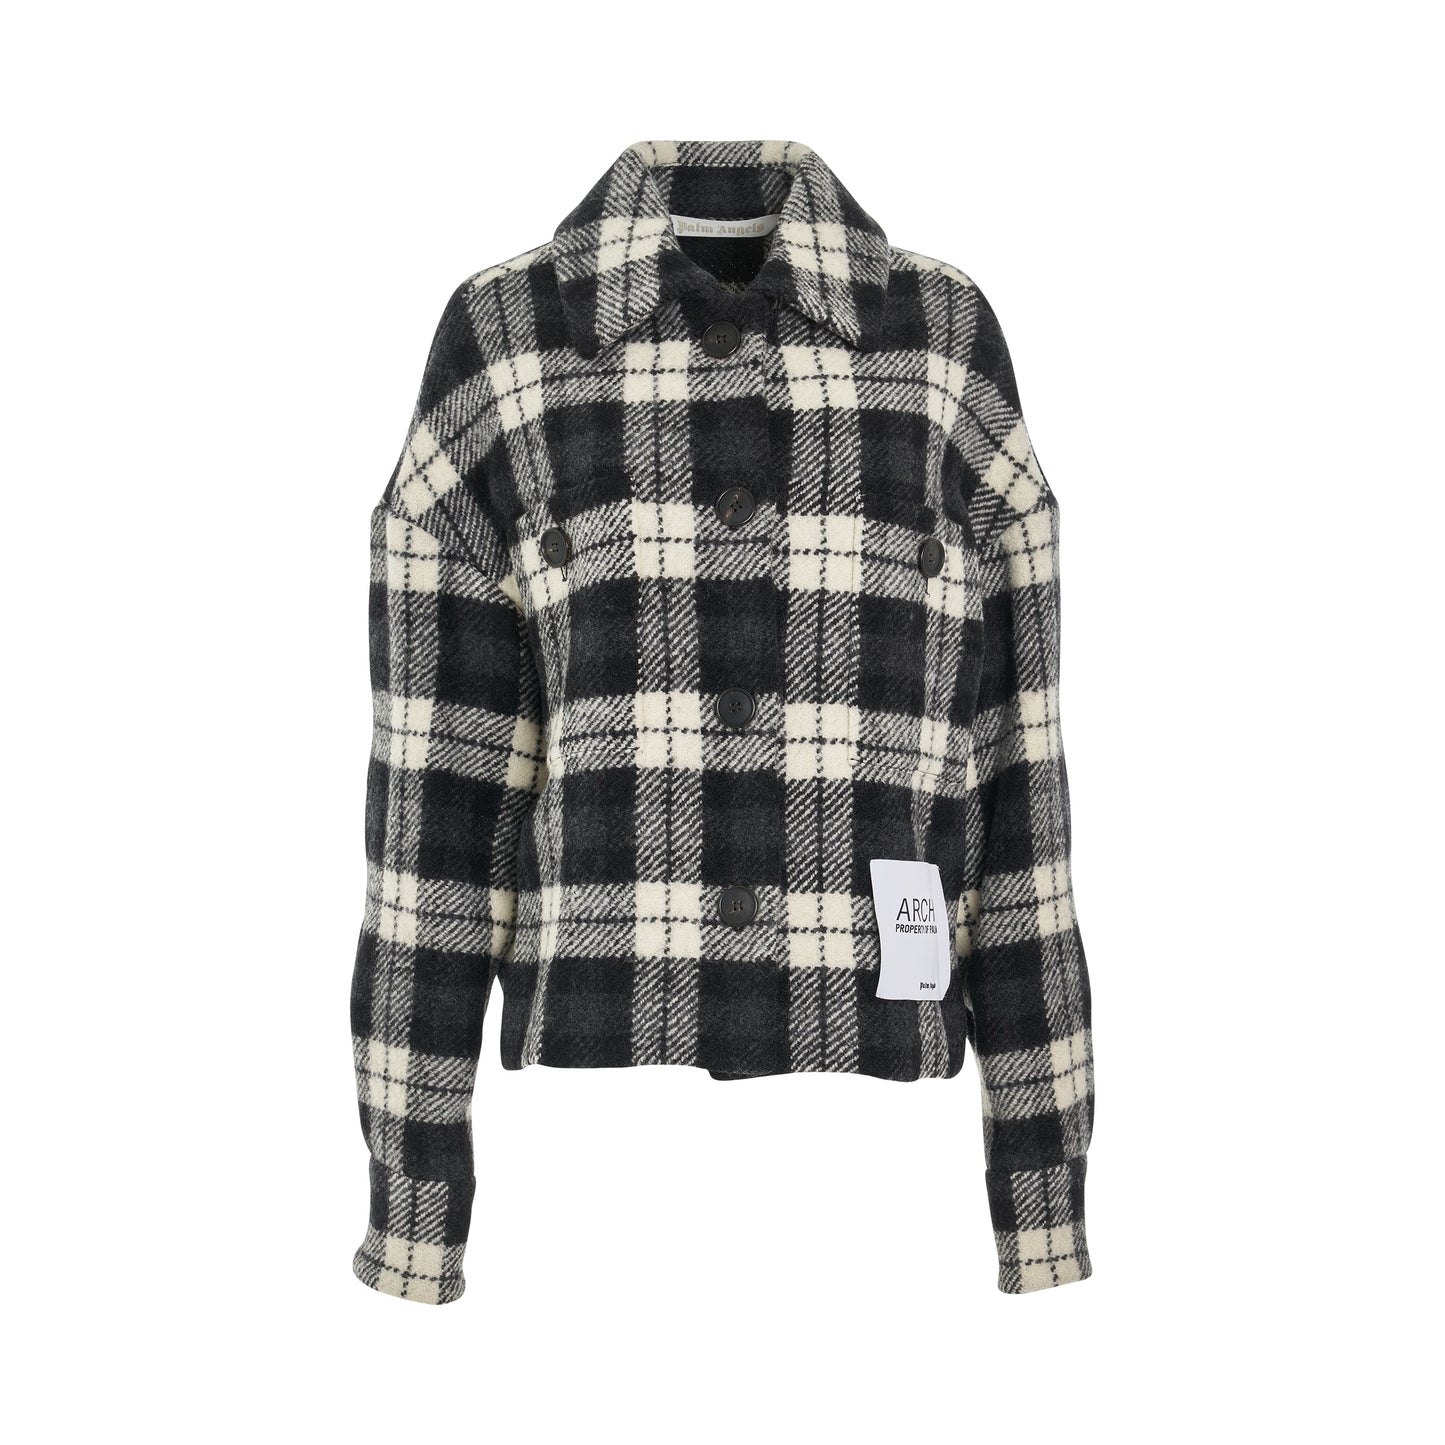 Checked Shirt Jacket in Black